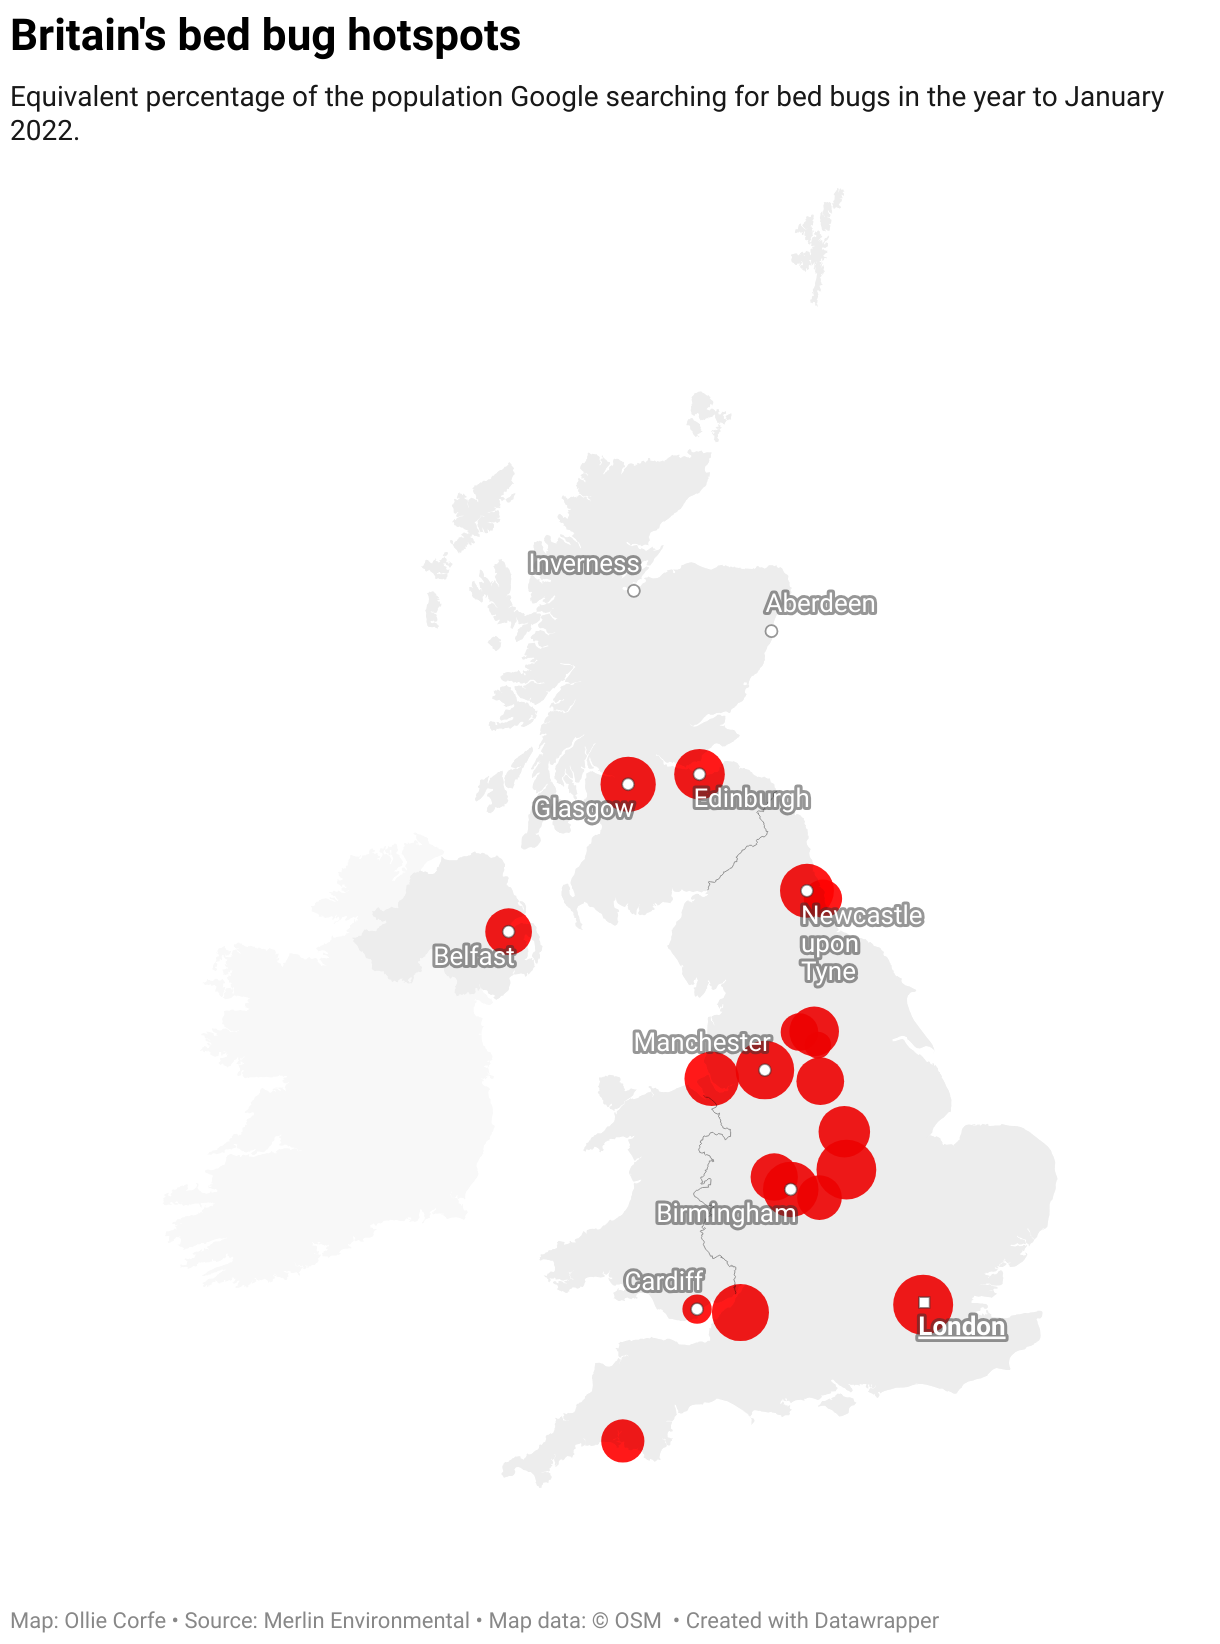 Bed bug capitals of Britain.